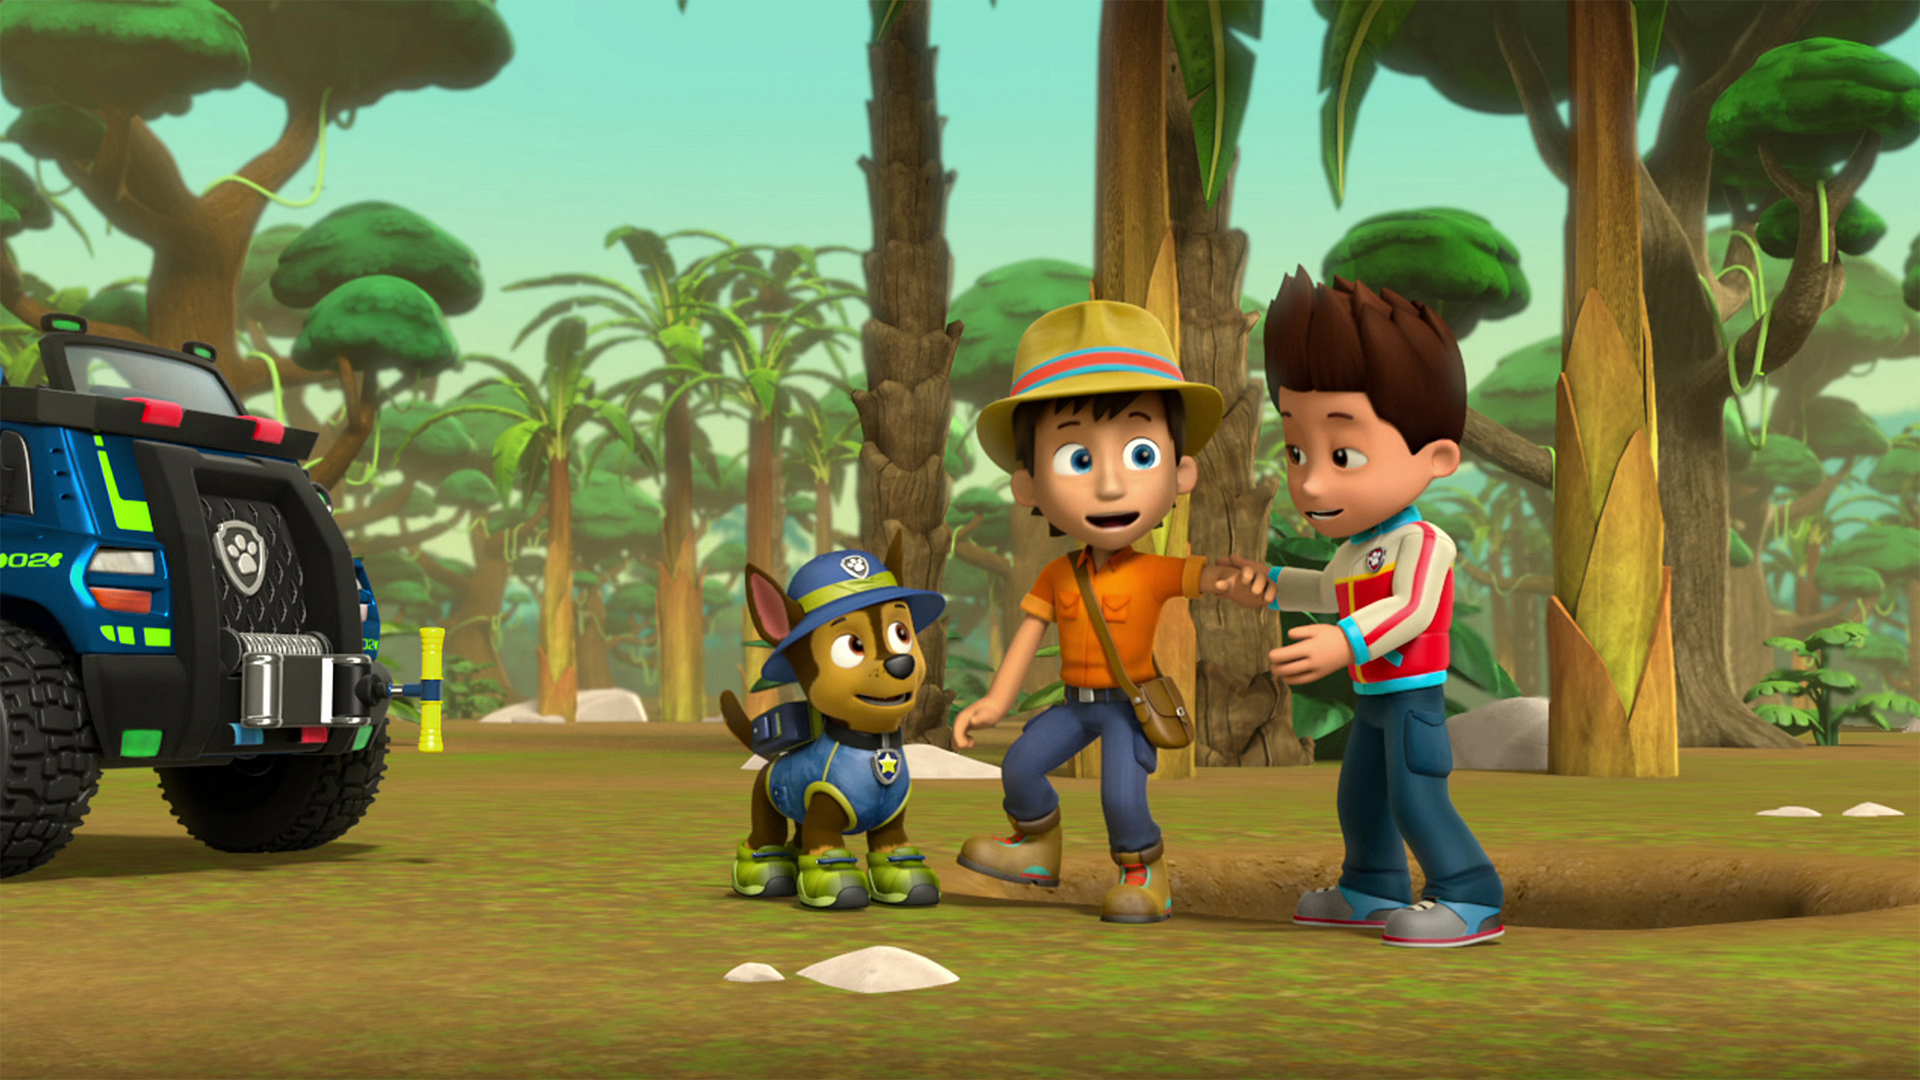 Watch PAW Patrol Season 3 Episode 15: Tracker Joins the Pups! show on Paramount Plus